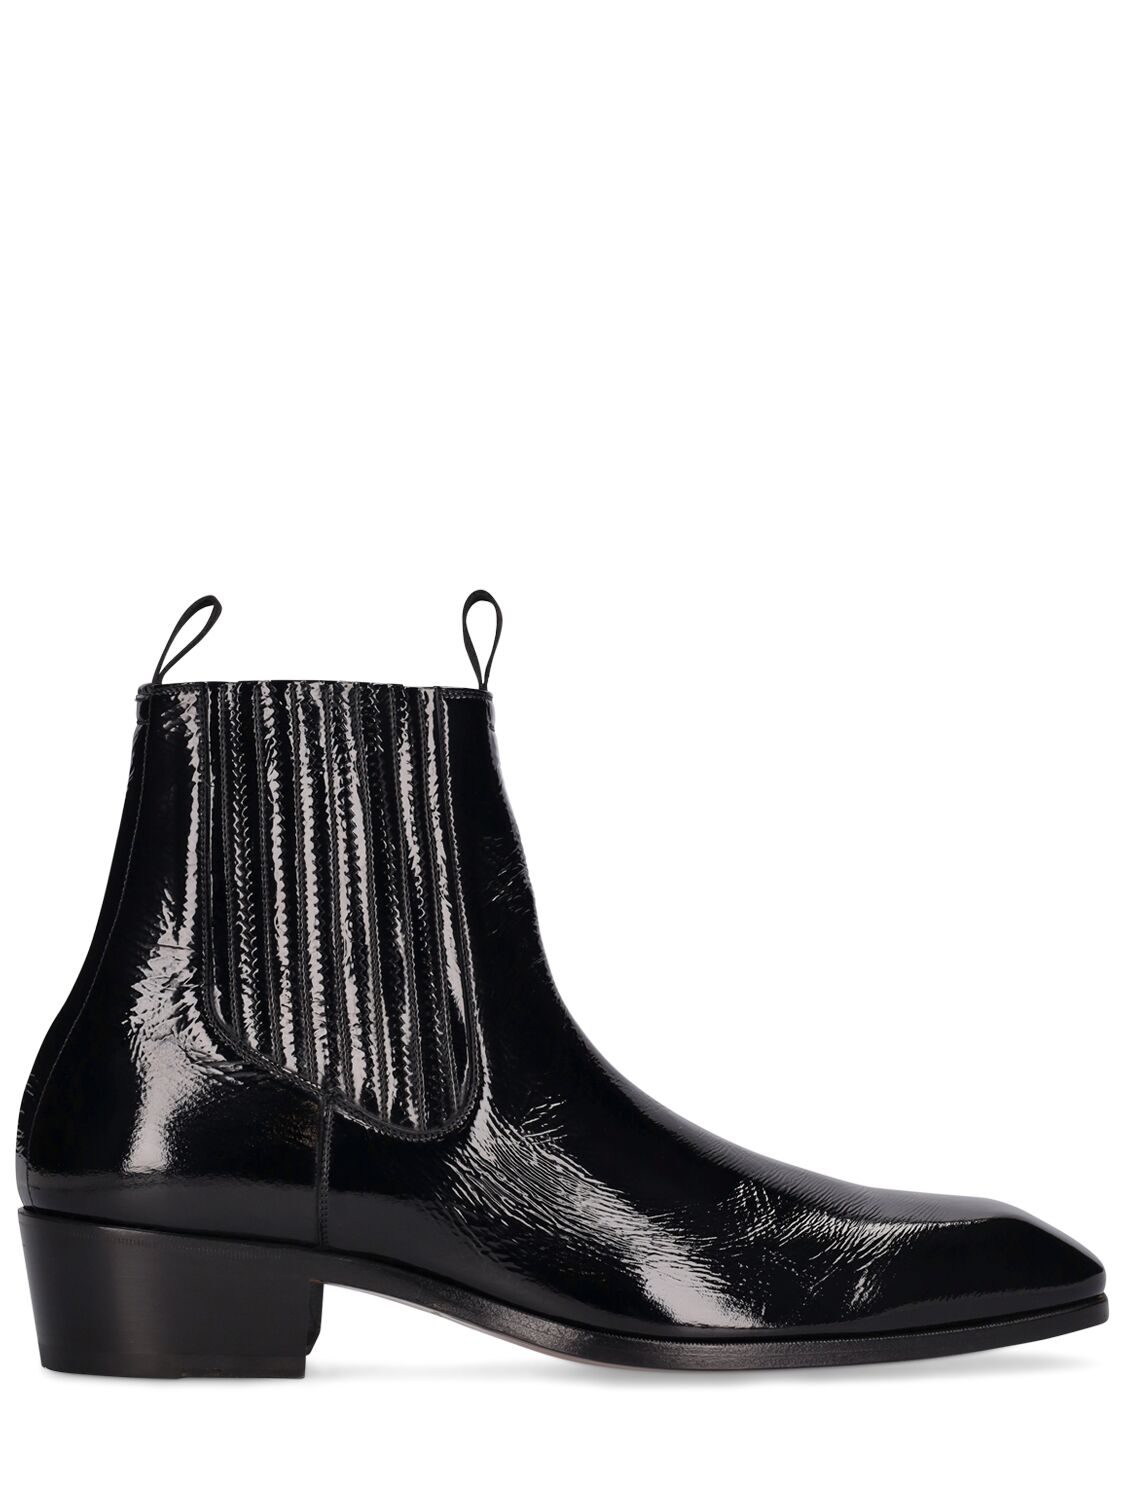 40mm Crackle Leather Ankle Boots